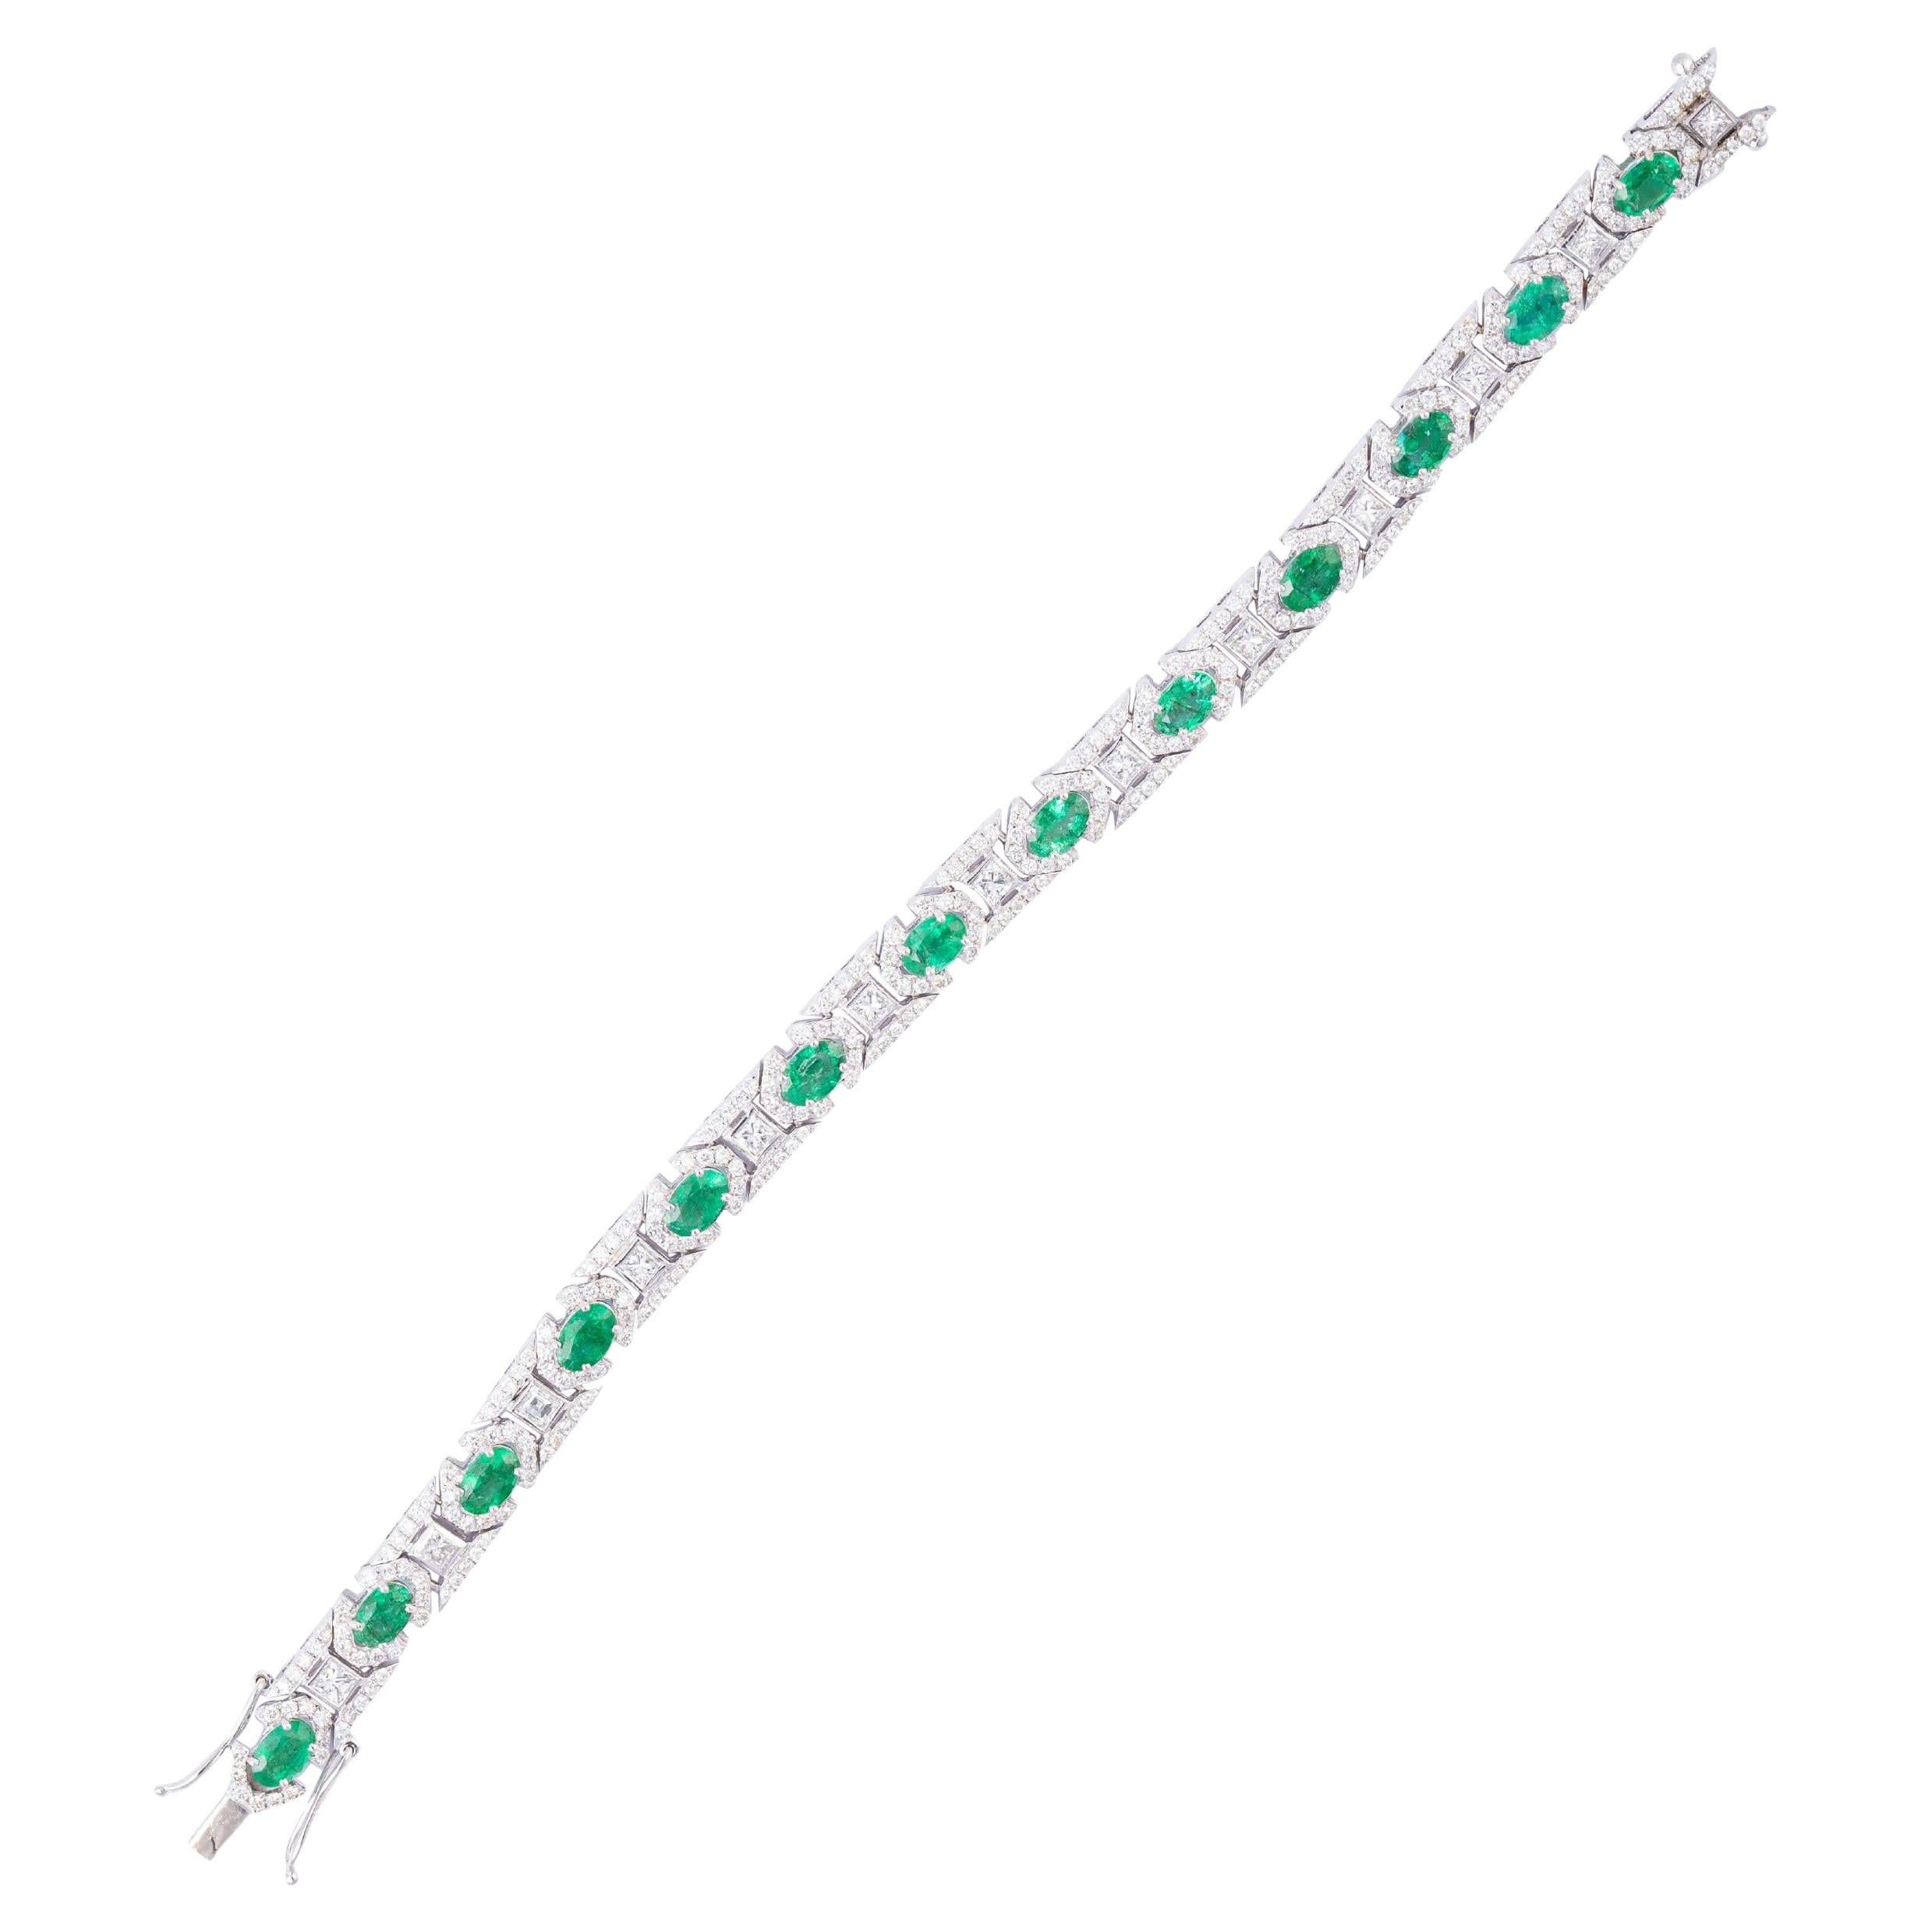 Natural Zambian Emerald Tennis Bracelet with Diamonds and 18k Gold